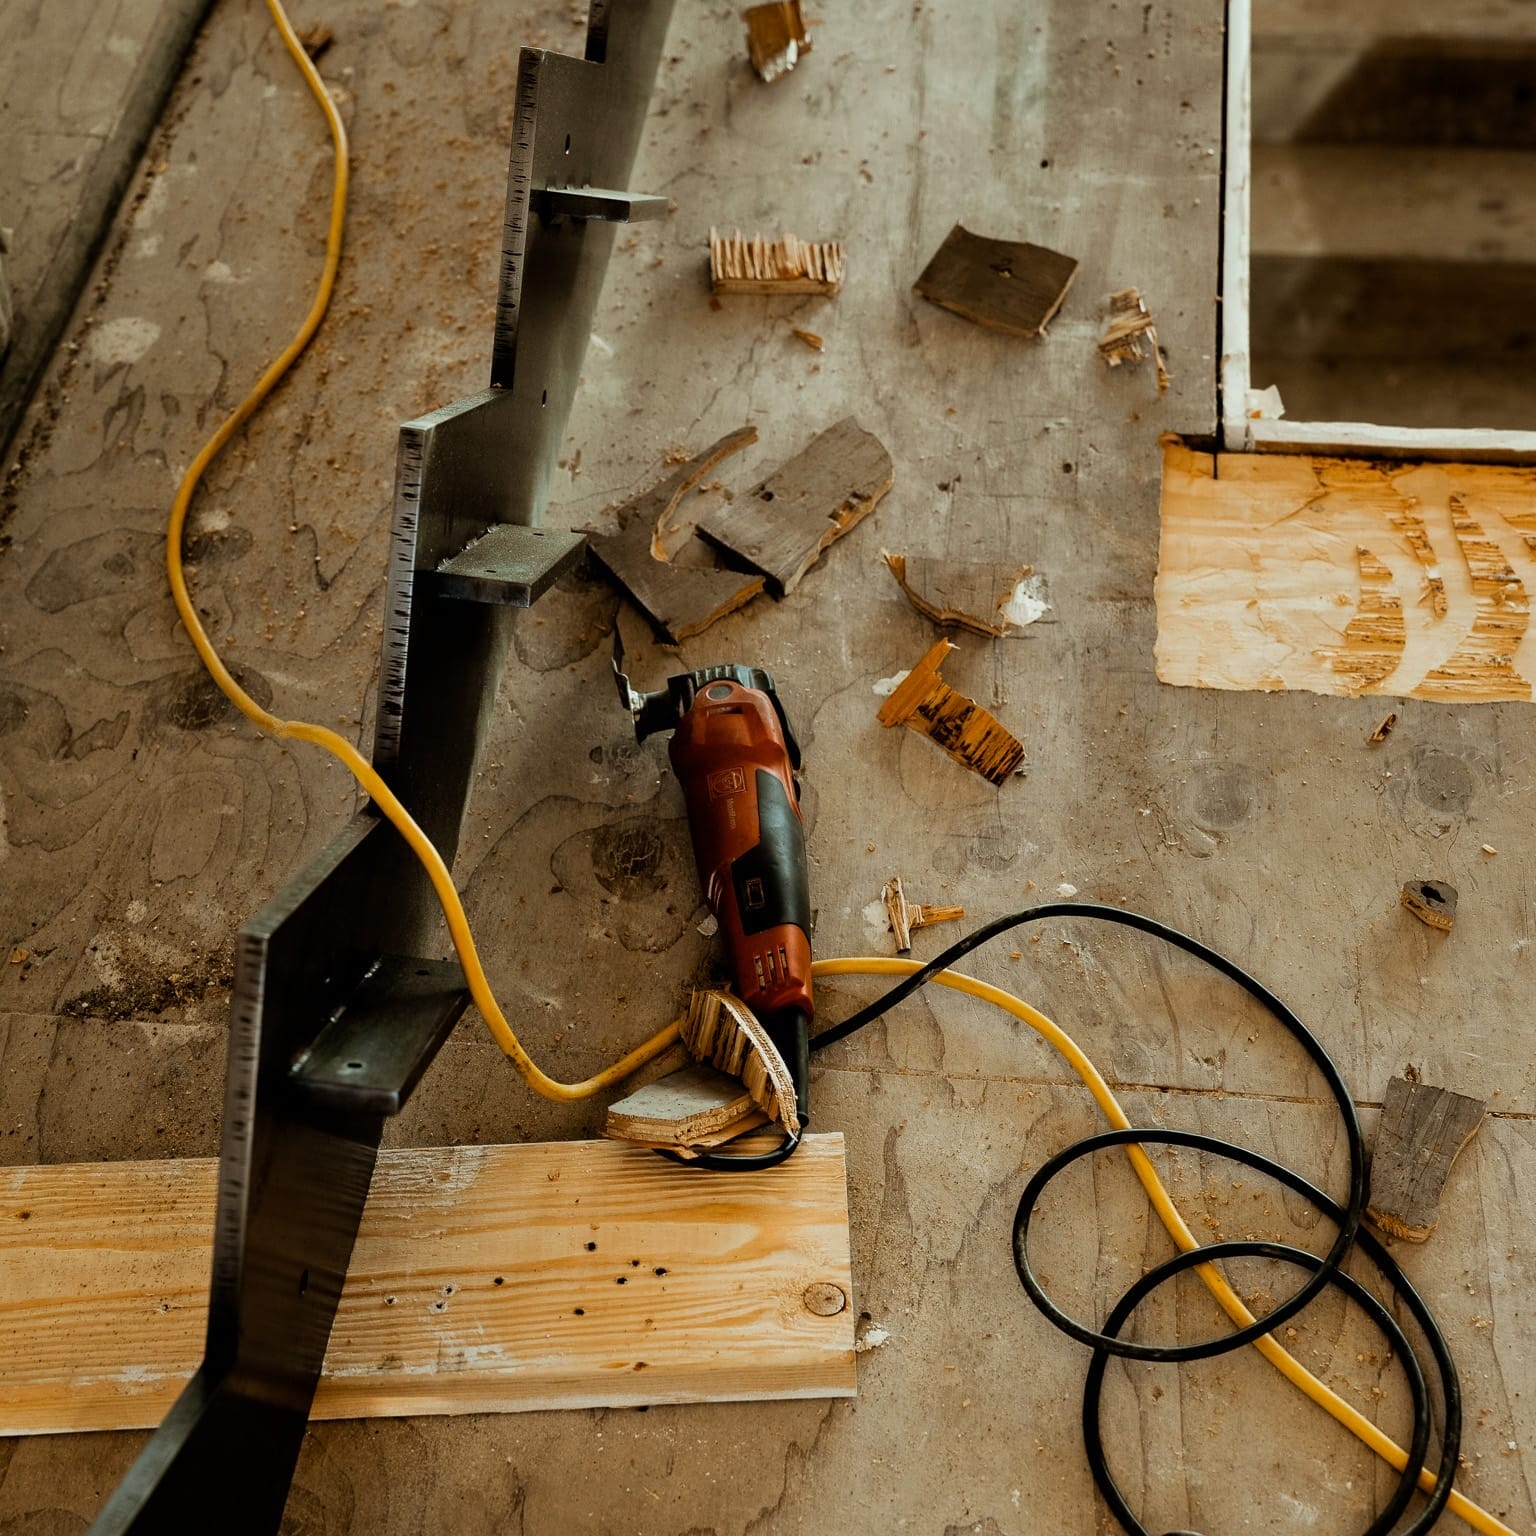 A power drill is being used at Dyna Metal Shop Seattle on a concrete floor.